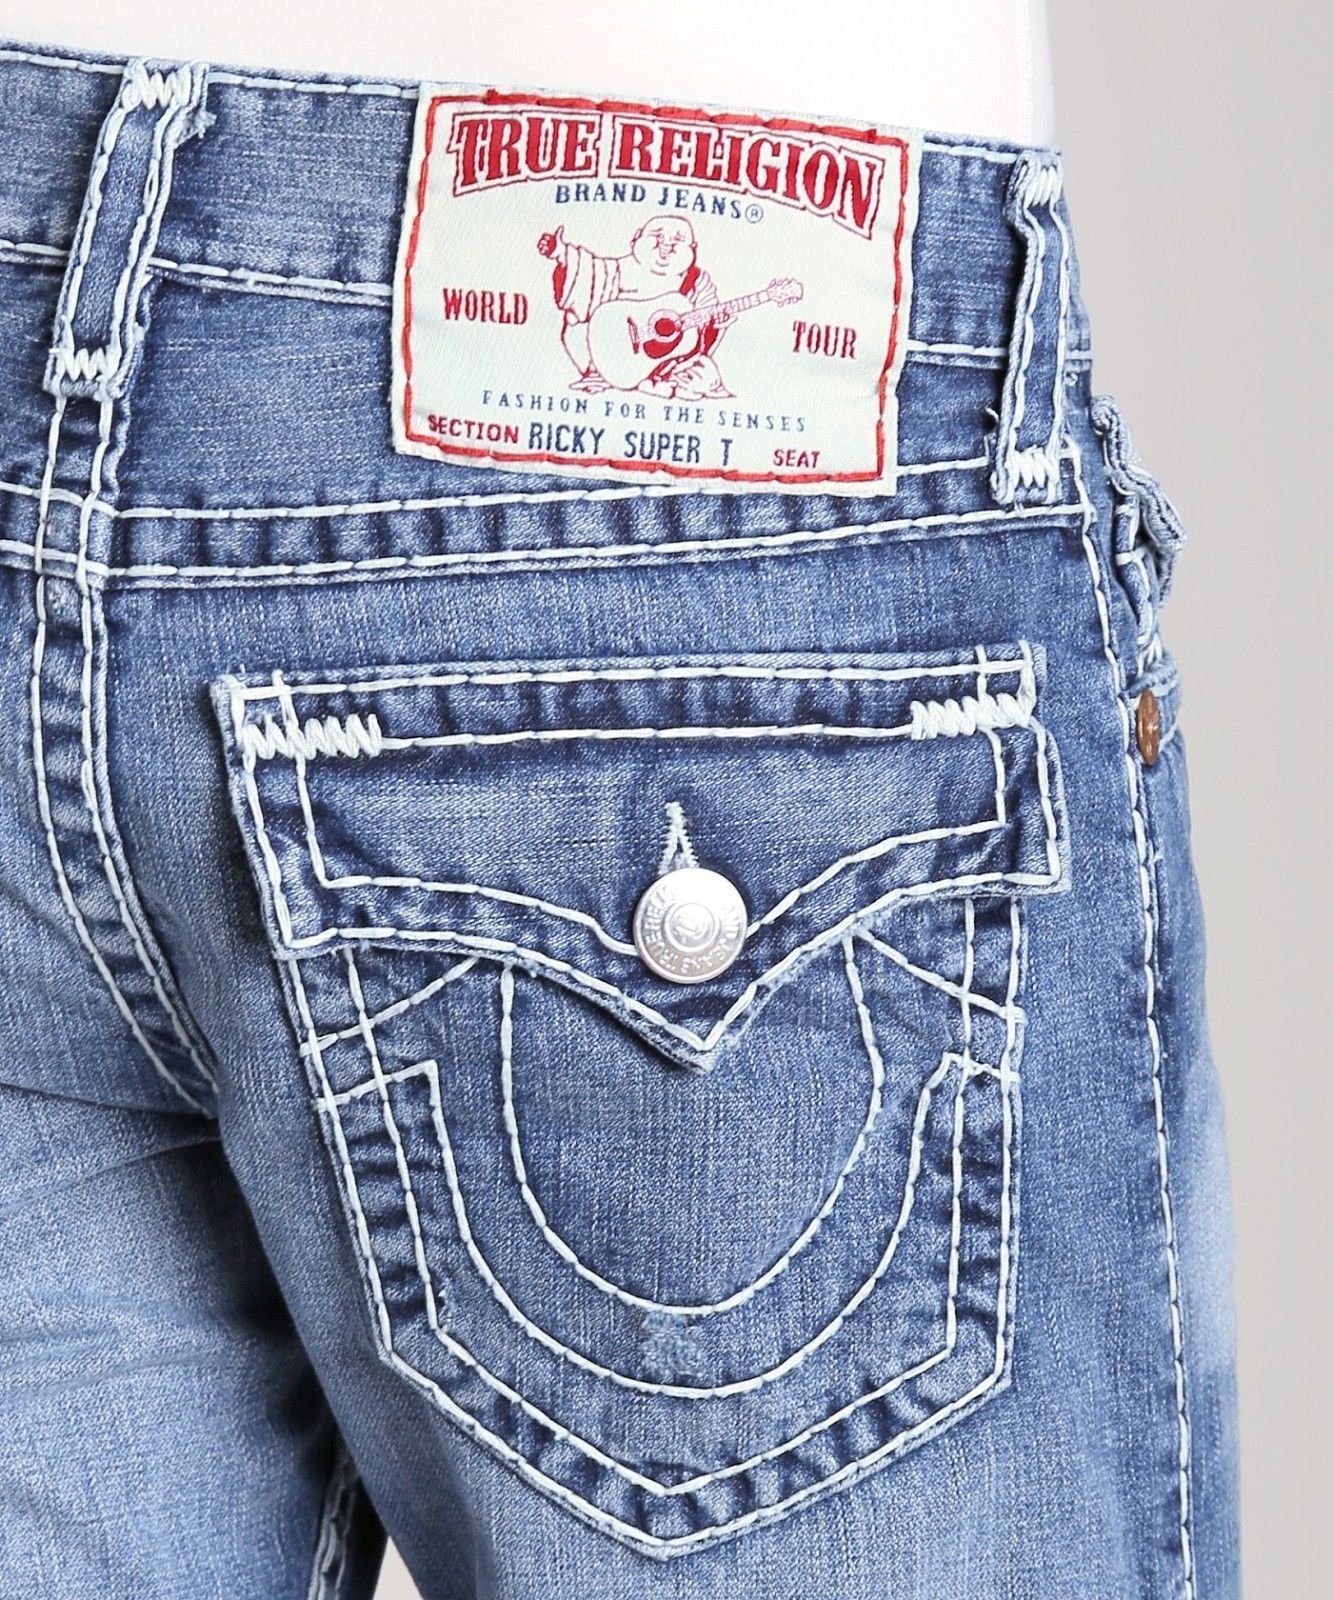 True Religion Jeans Ricky Super T Independence 24859NNBT2-WHT